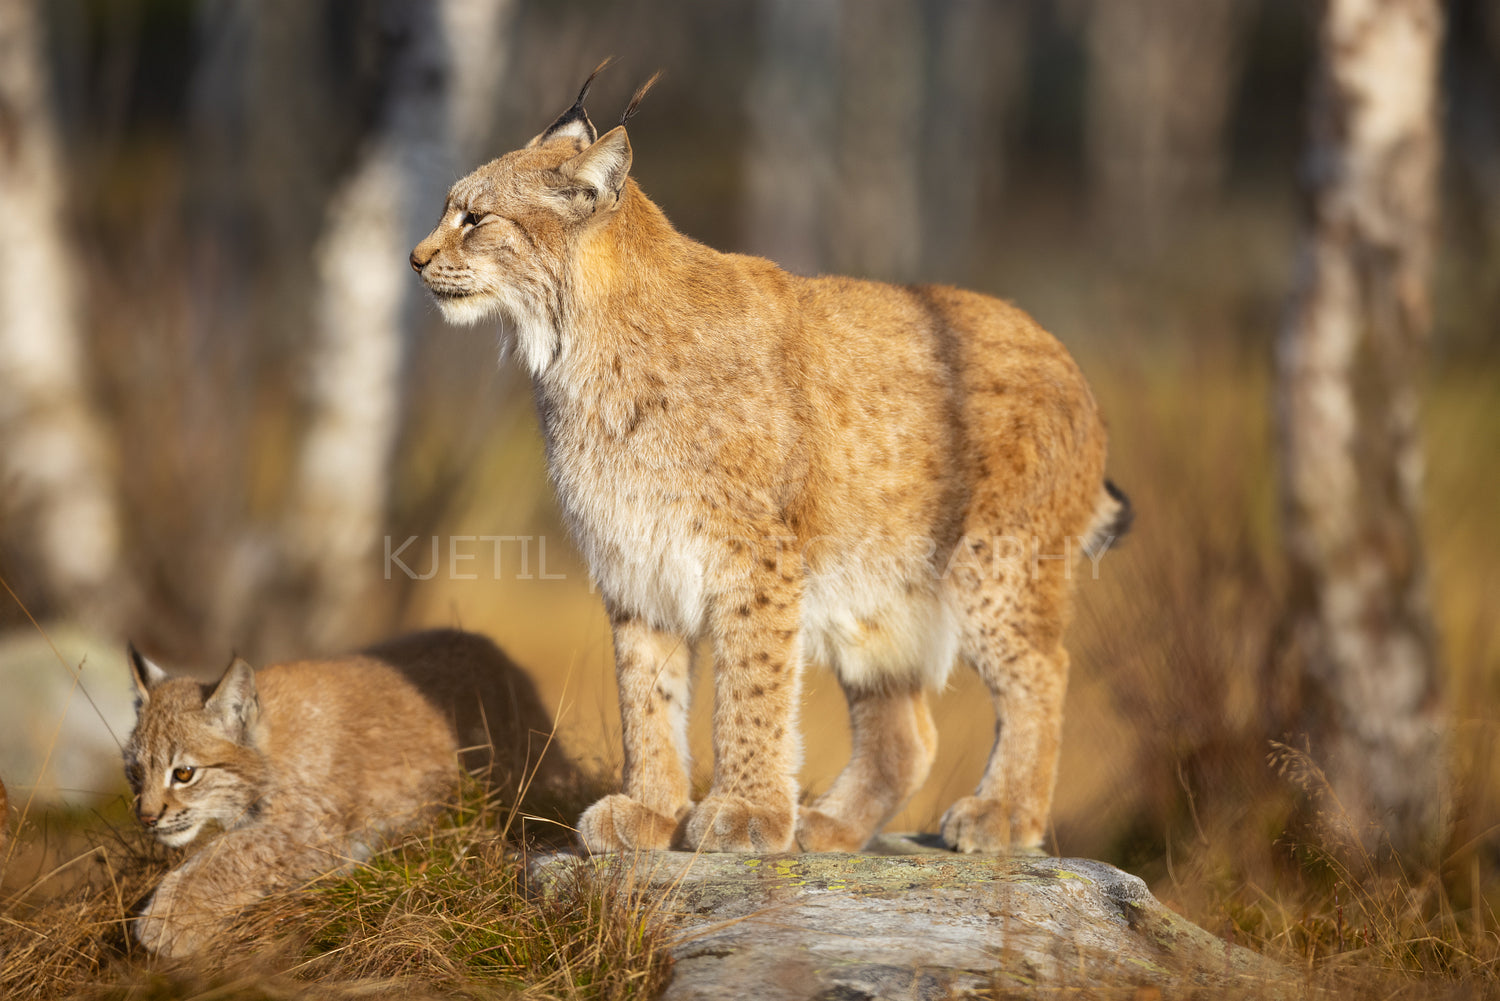 Caring eurasian lynx mother looks after her cub in the forest